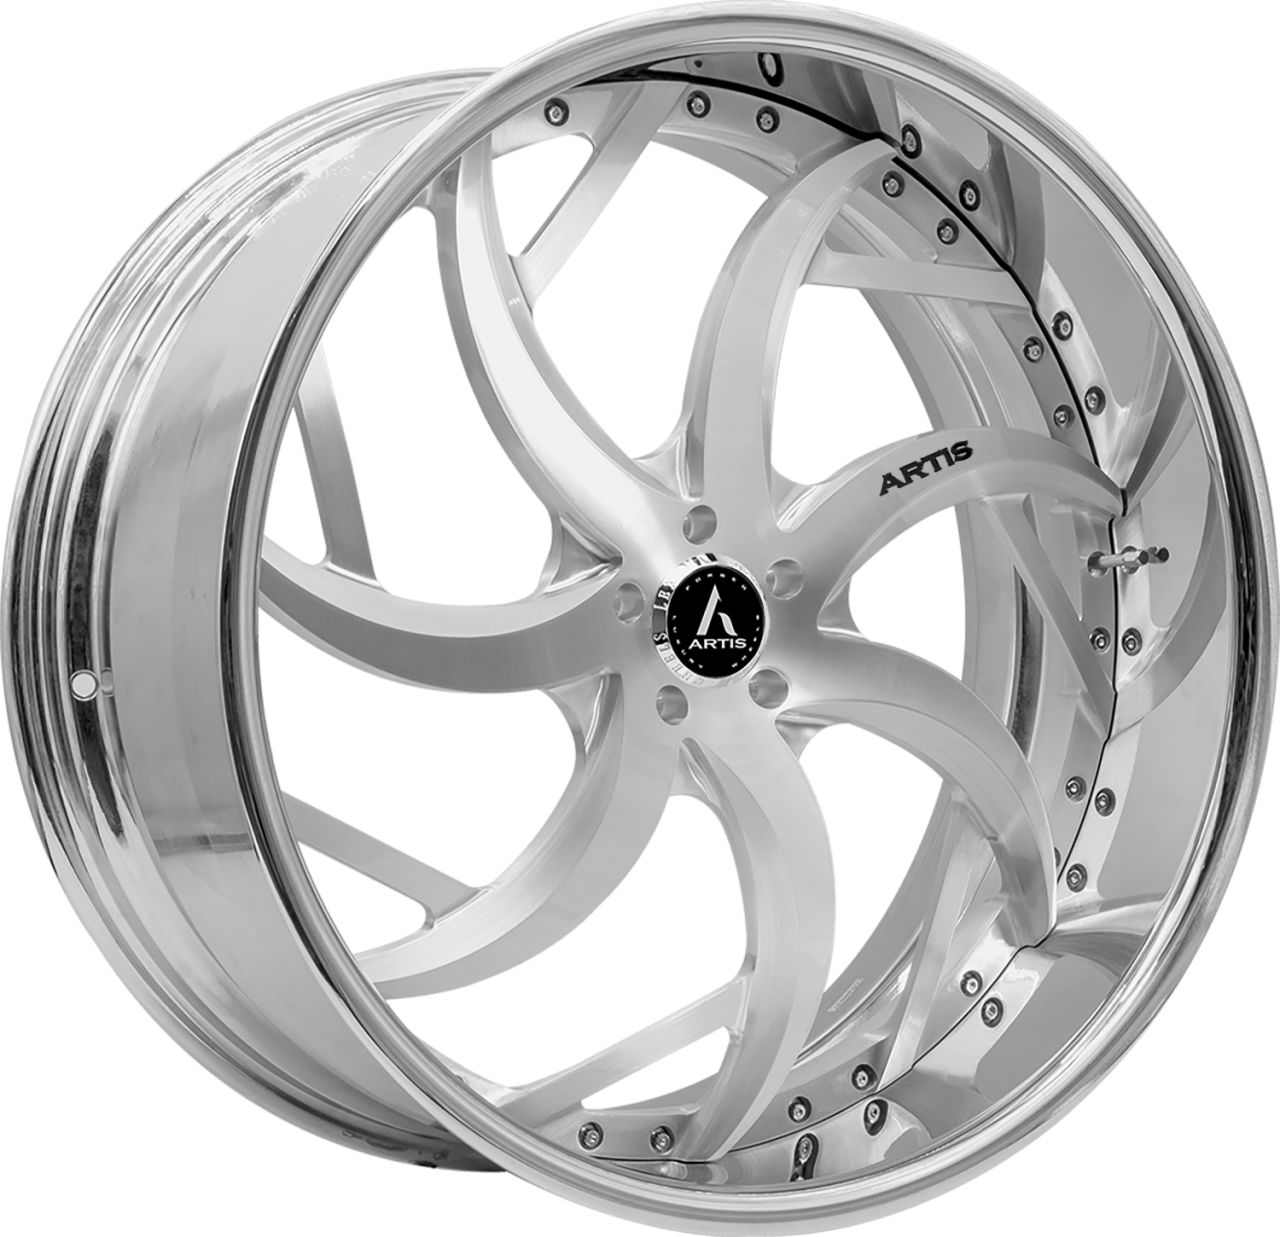 Artis Forged Sin City wheel with Brushed finish